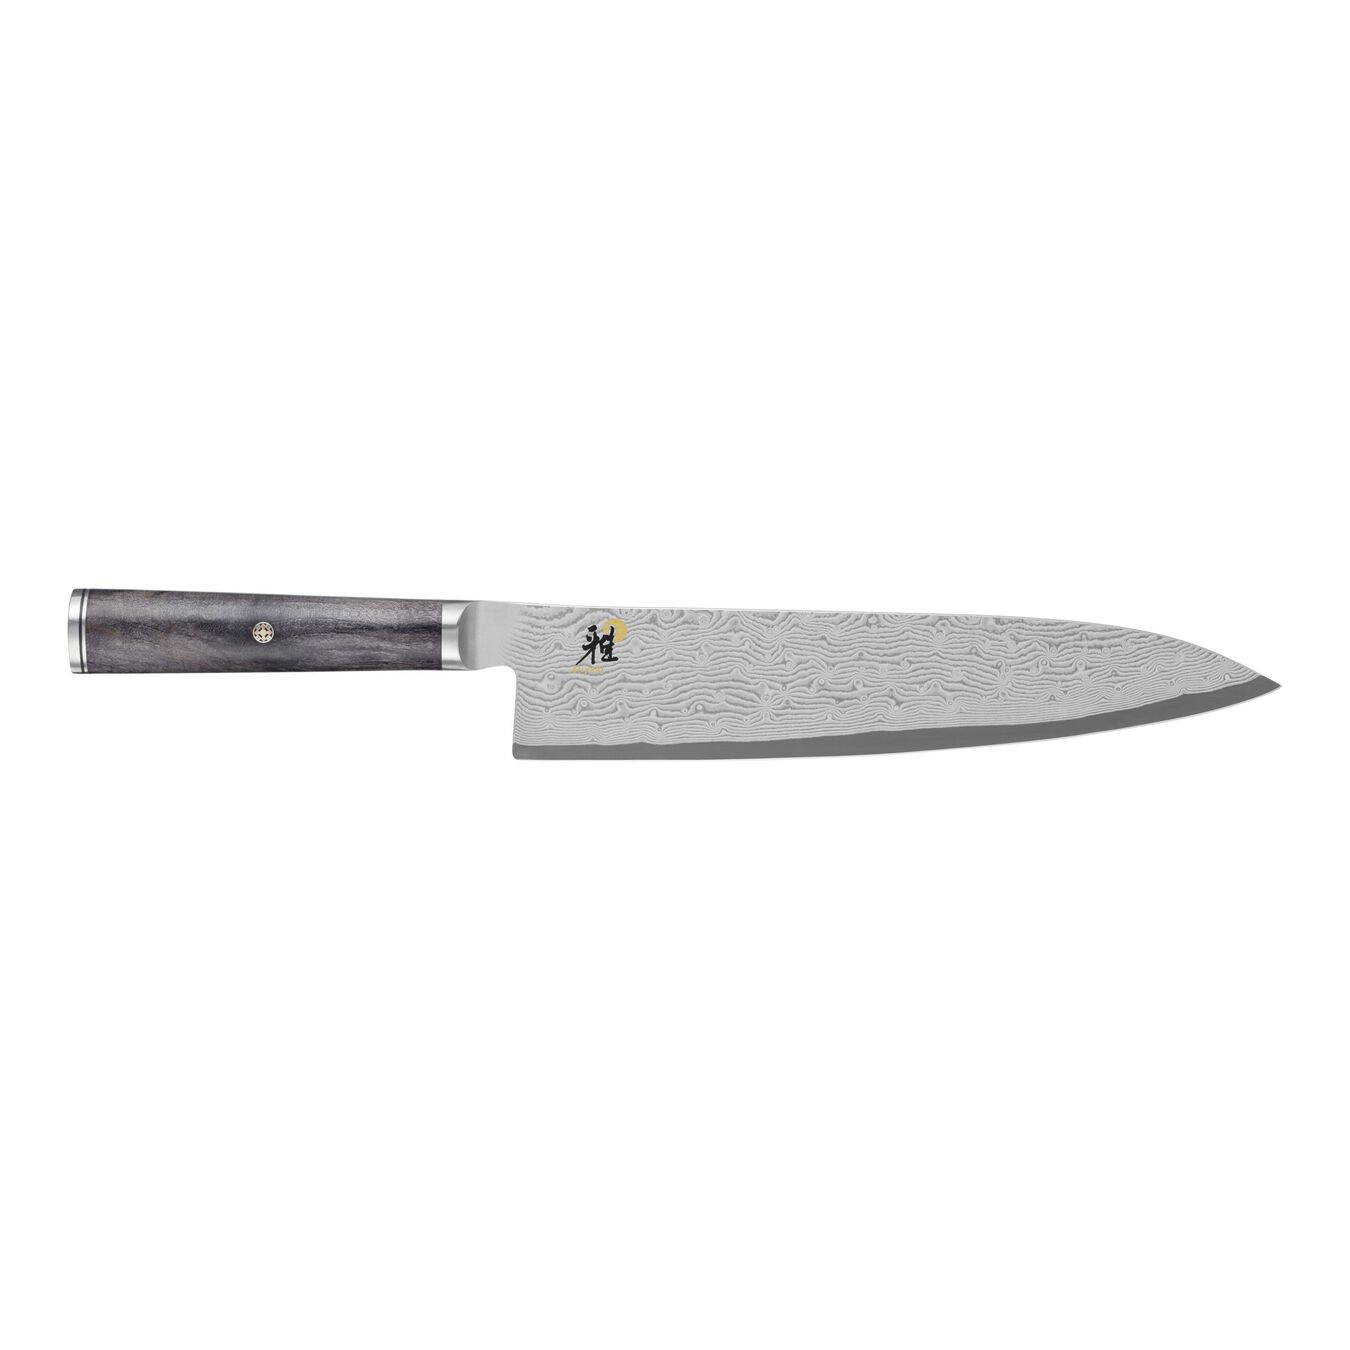 9.5-inch, Chef's Knife,,large 1